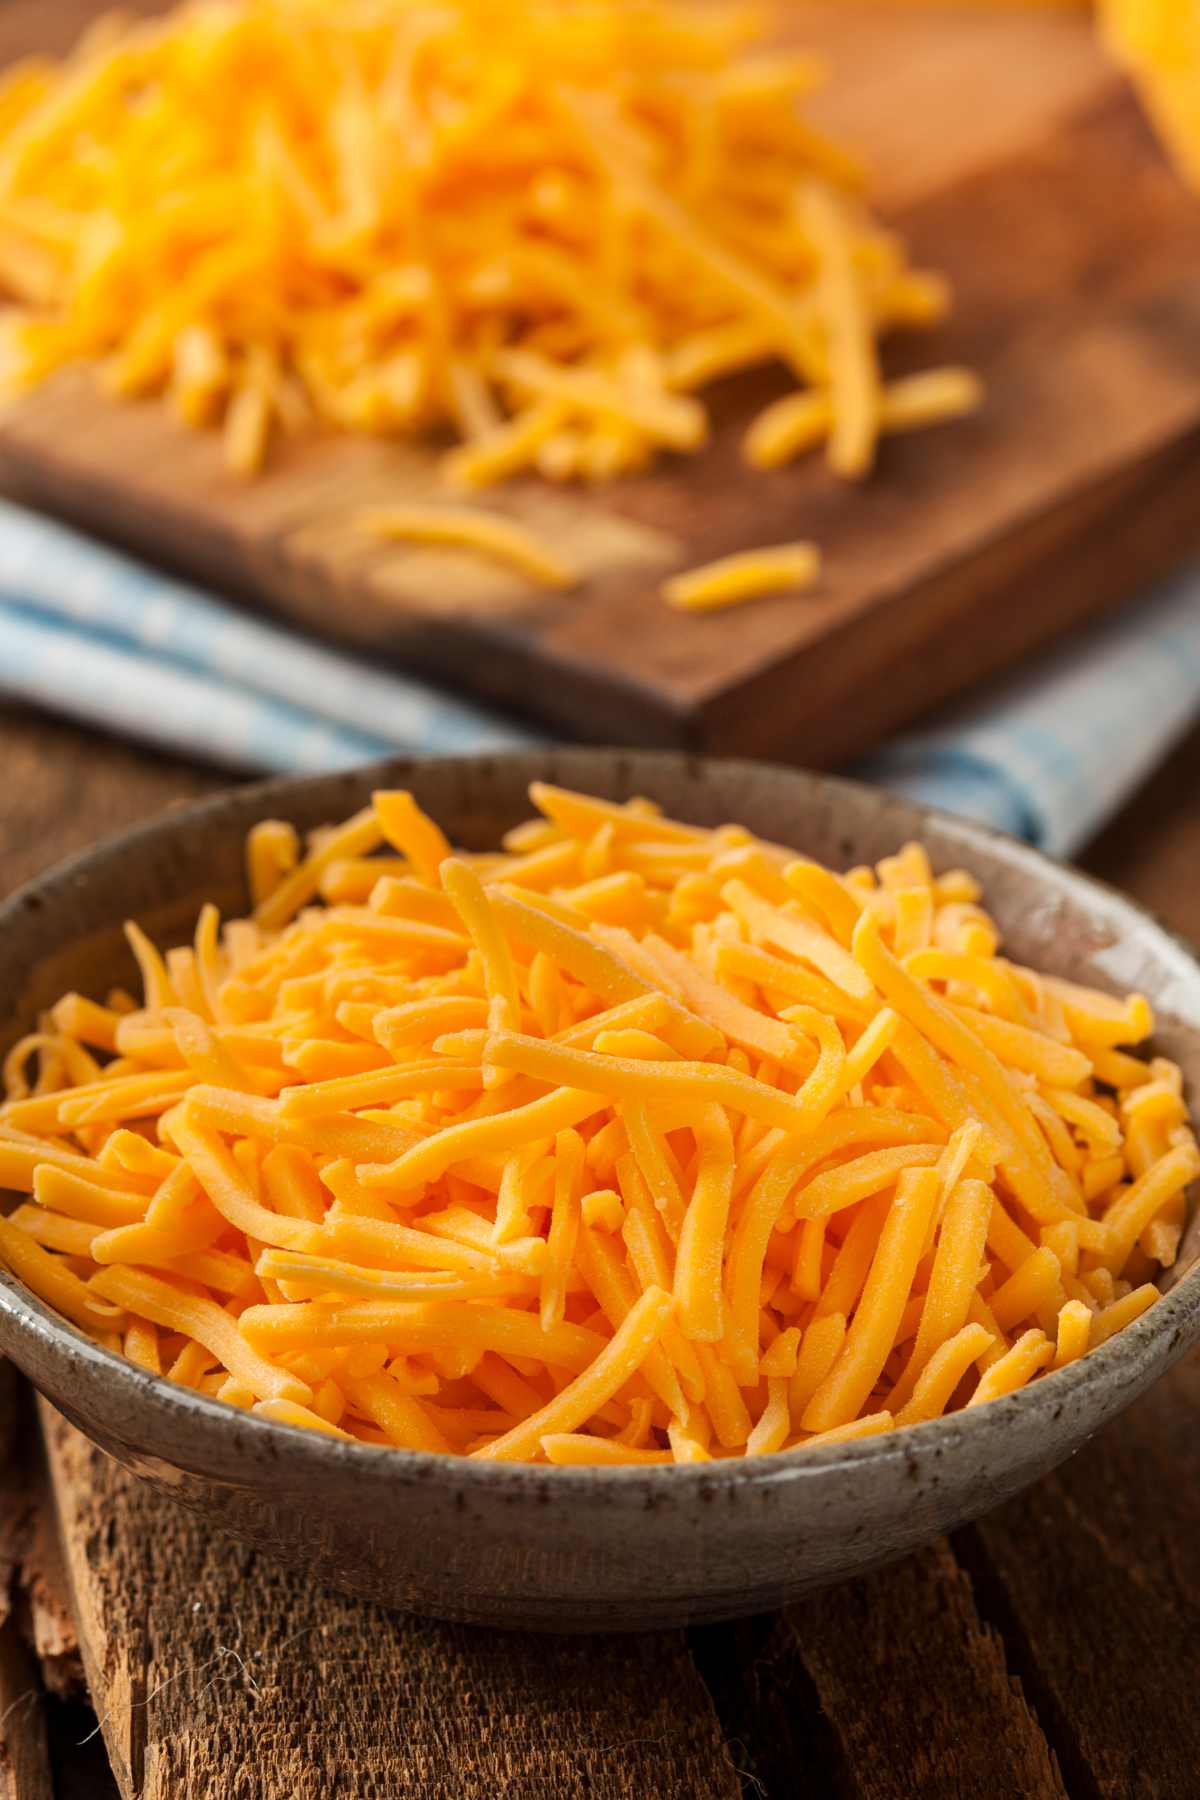 Are you a fan of cheddar cheese but wondering if it fits into your keto diet plan? In this post, we will explore the carb content of cheddar cheese and share with you some delicious low-carb keto cheddar cheese recipes.